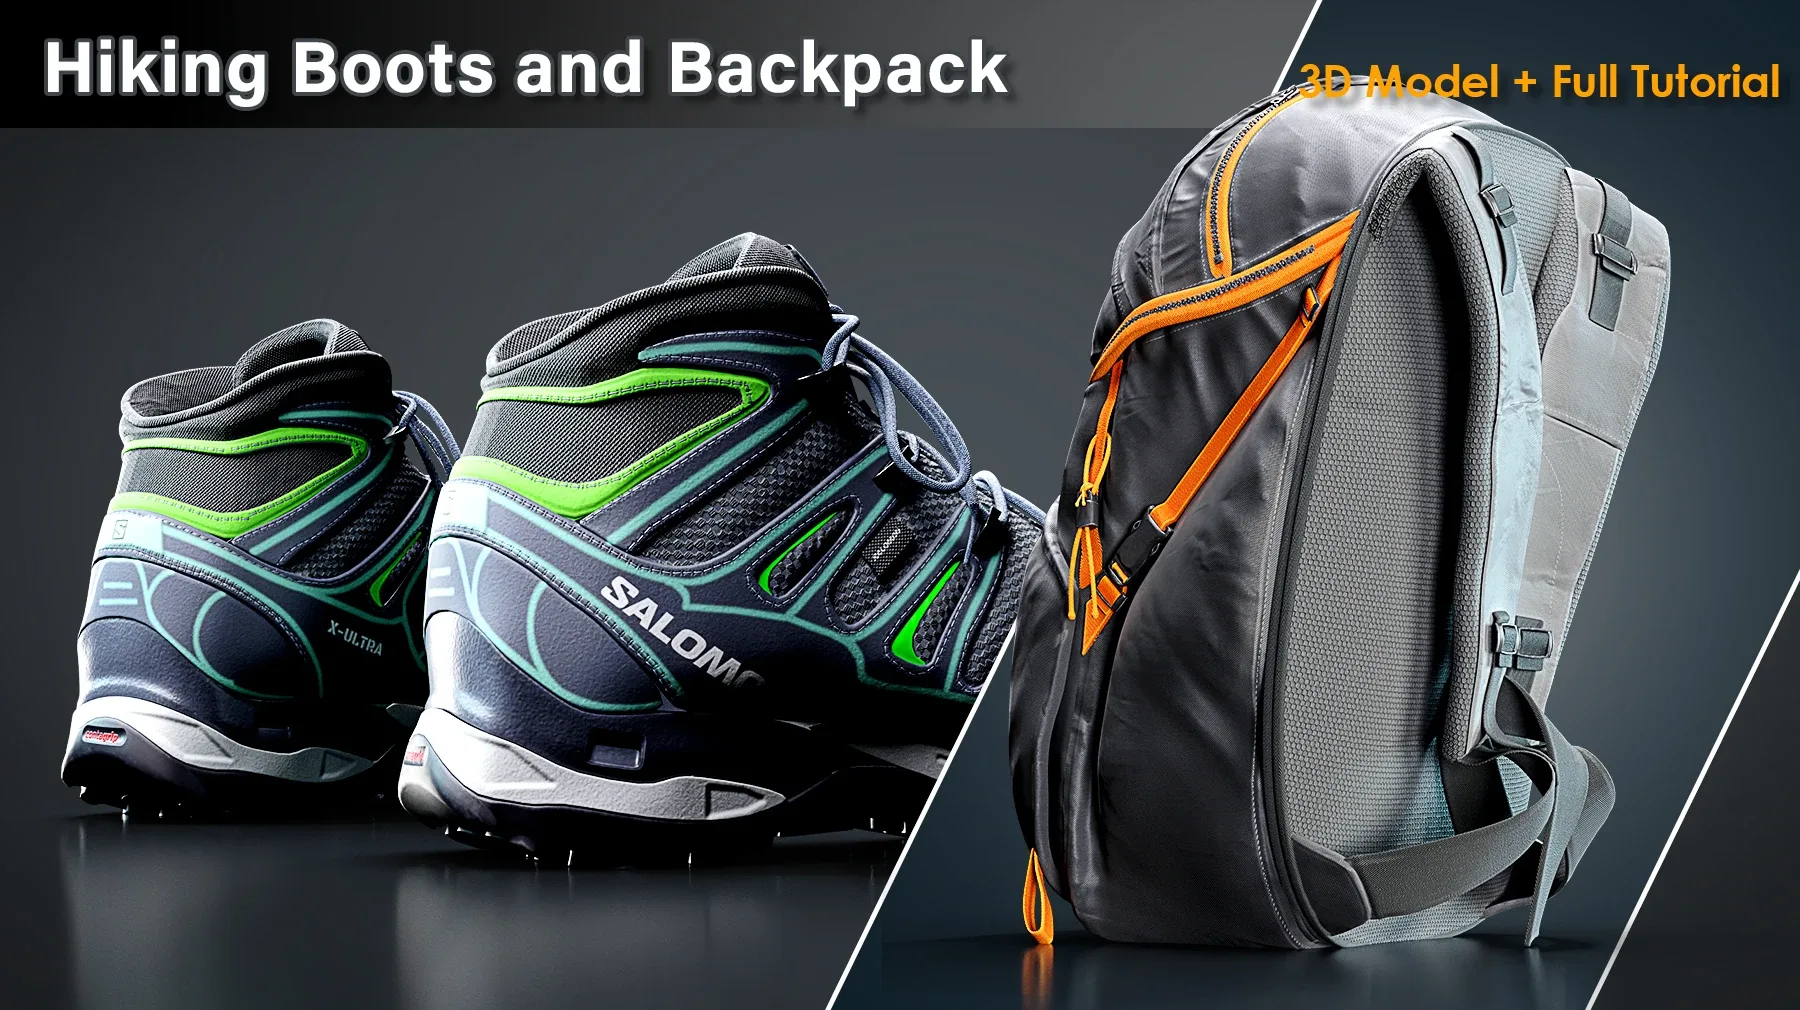 Hiking Boots and Backpack/ Full Tutorial + 3D Model